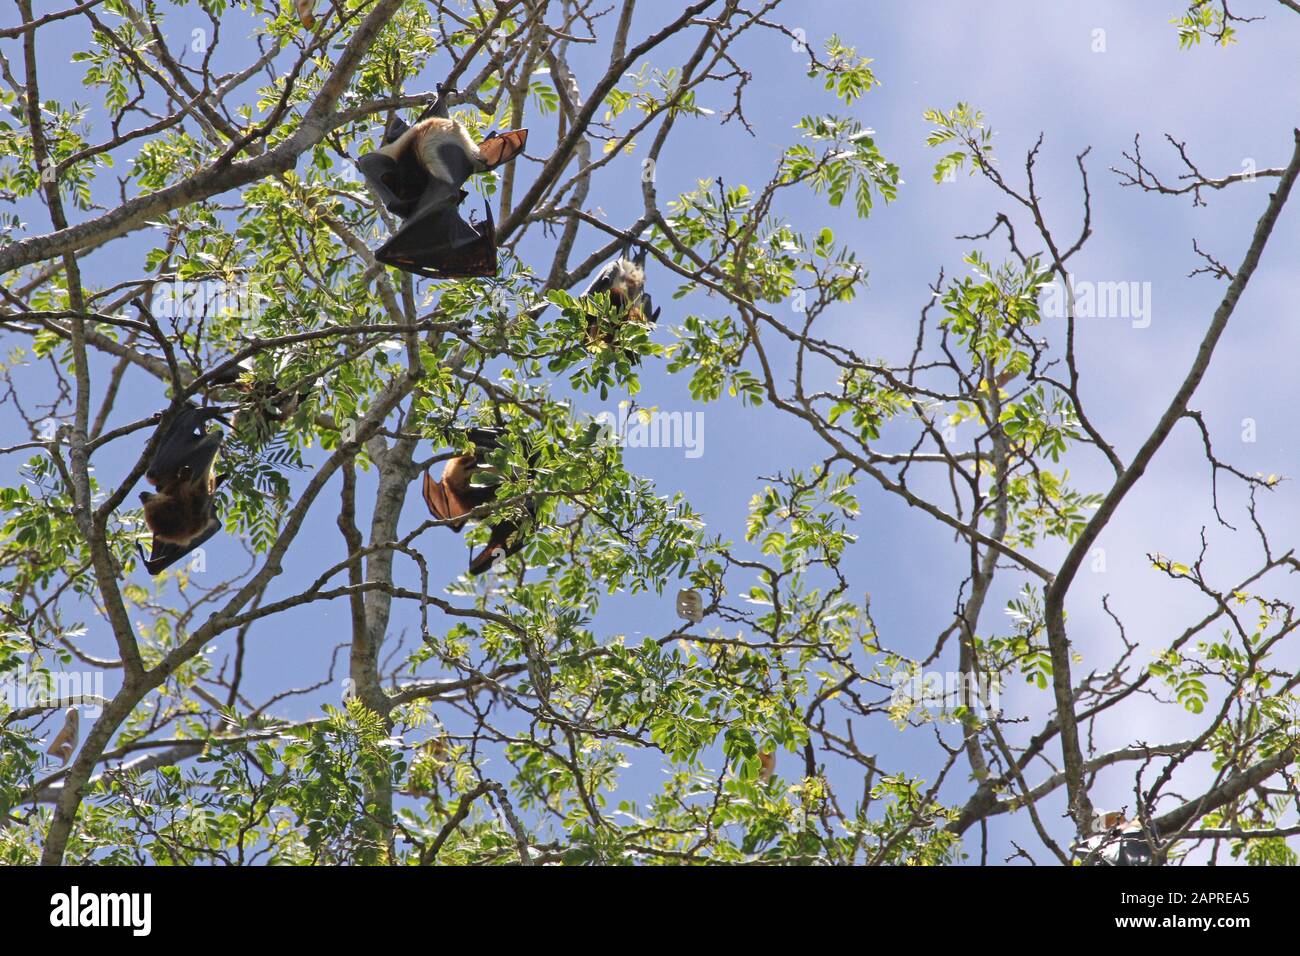 Mauritian flying fox (Pteropus niger), also known as Greater Mascarene flying fox or Mauritius fruit bat on tree branch in Mauritius. Stock Photo